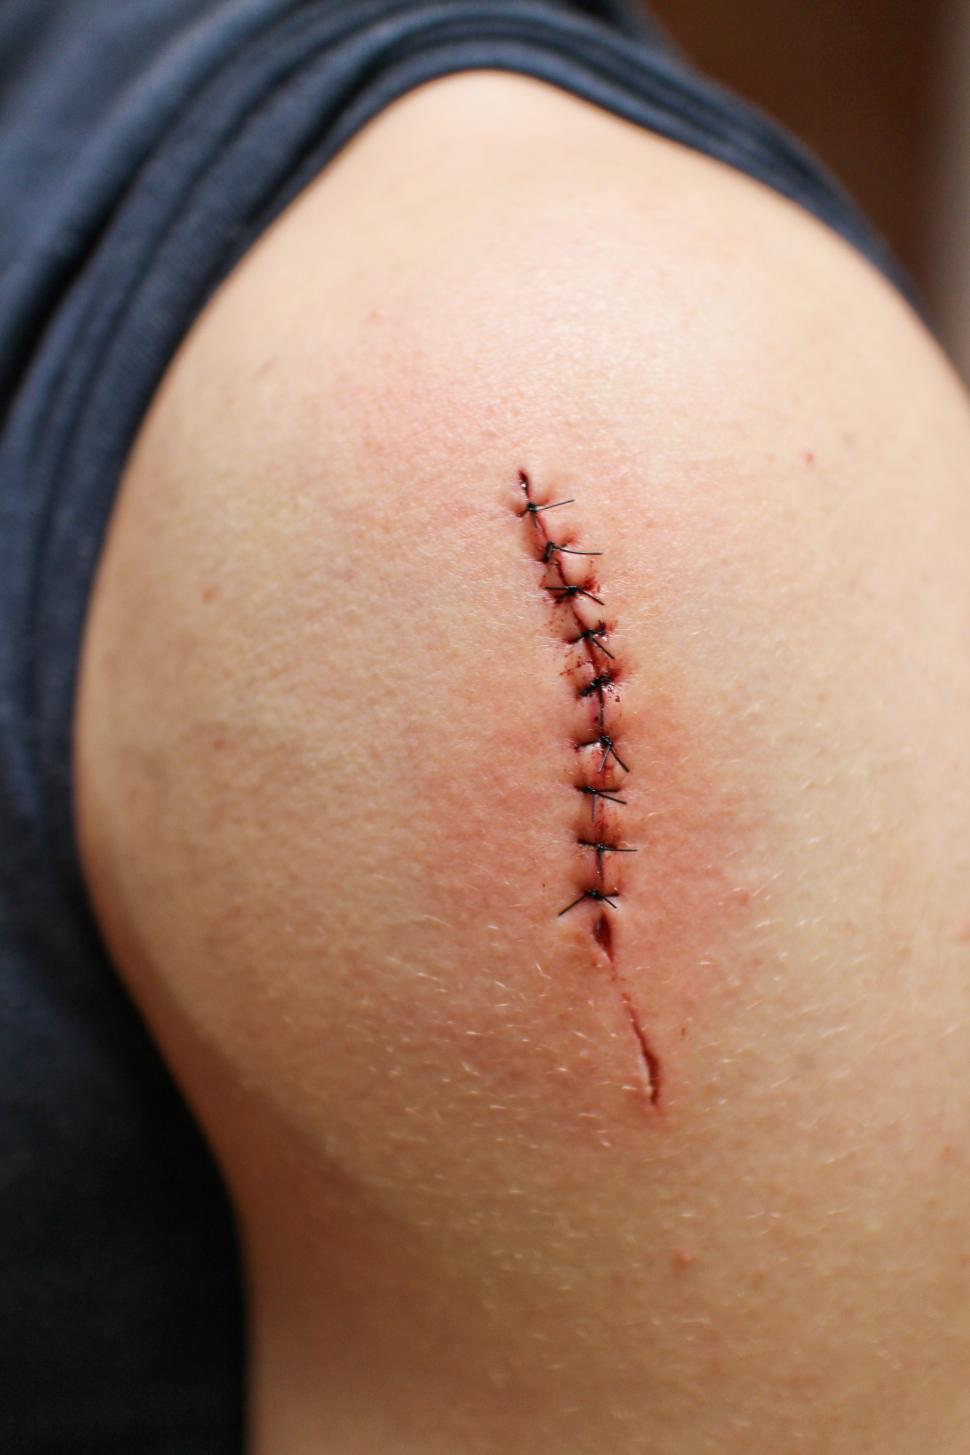 Download Free Stock Photo of Stitches on wound 